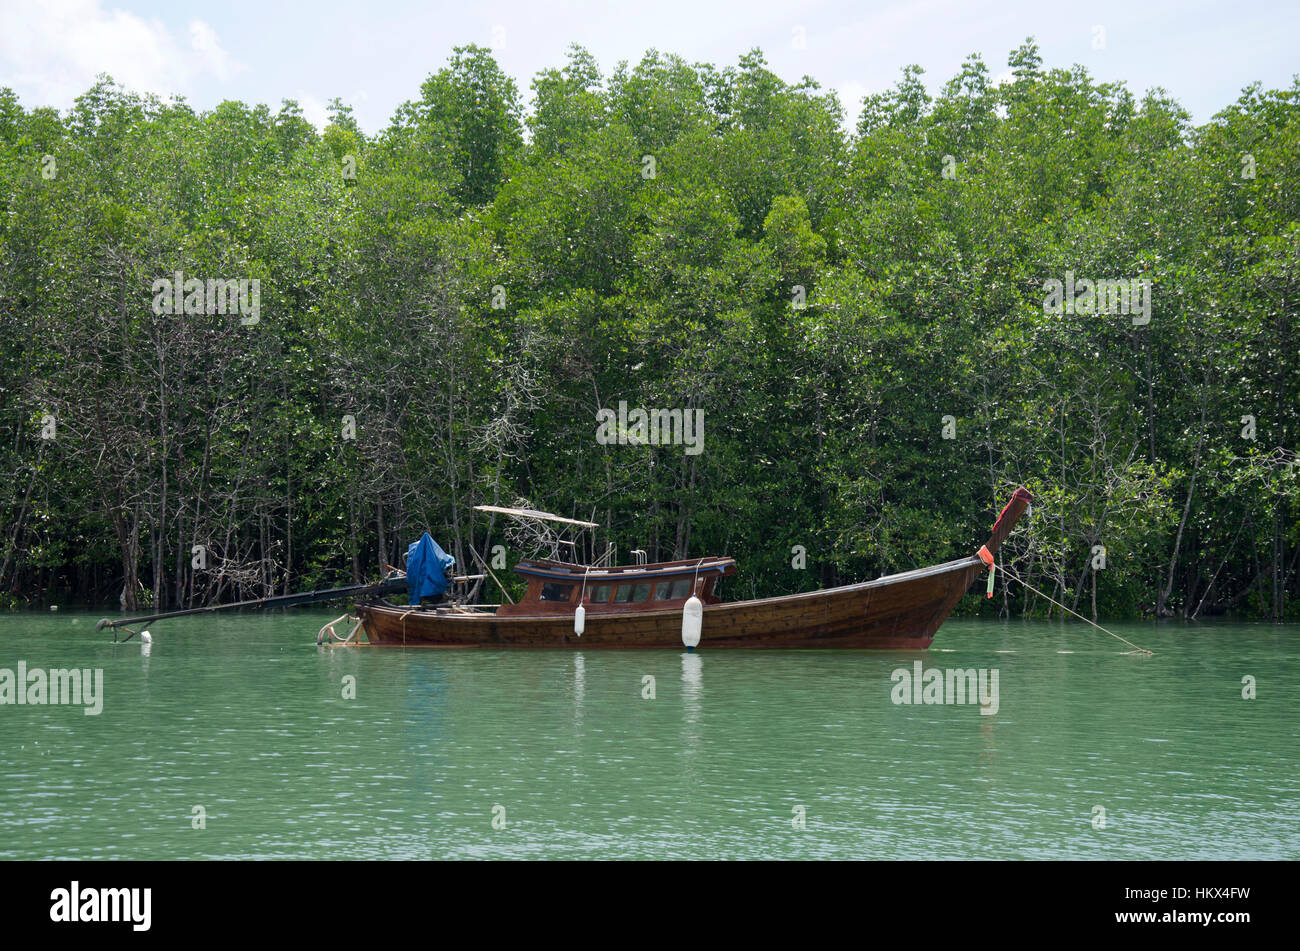 Asian thai people stop Classic wooden boat on the sea near Mangrove forest or Intertidal forest at the estuary of a river at Bang Rong Pier in Phuket, Stock Photo